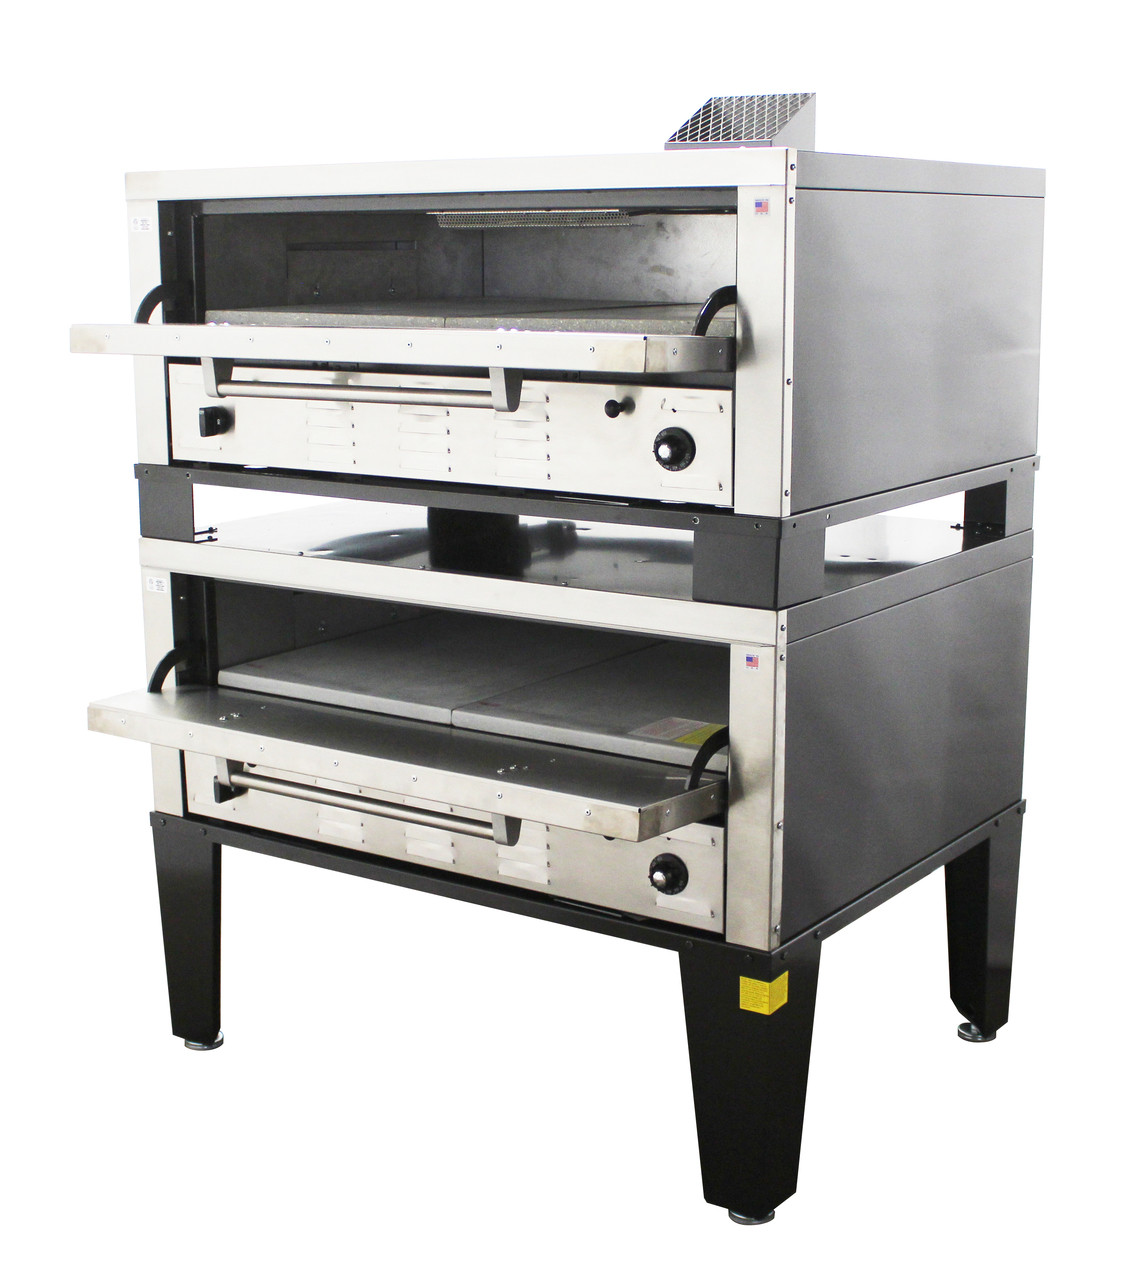 Double Deck Gas Oven, Size: Big/Large